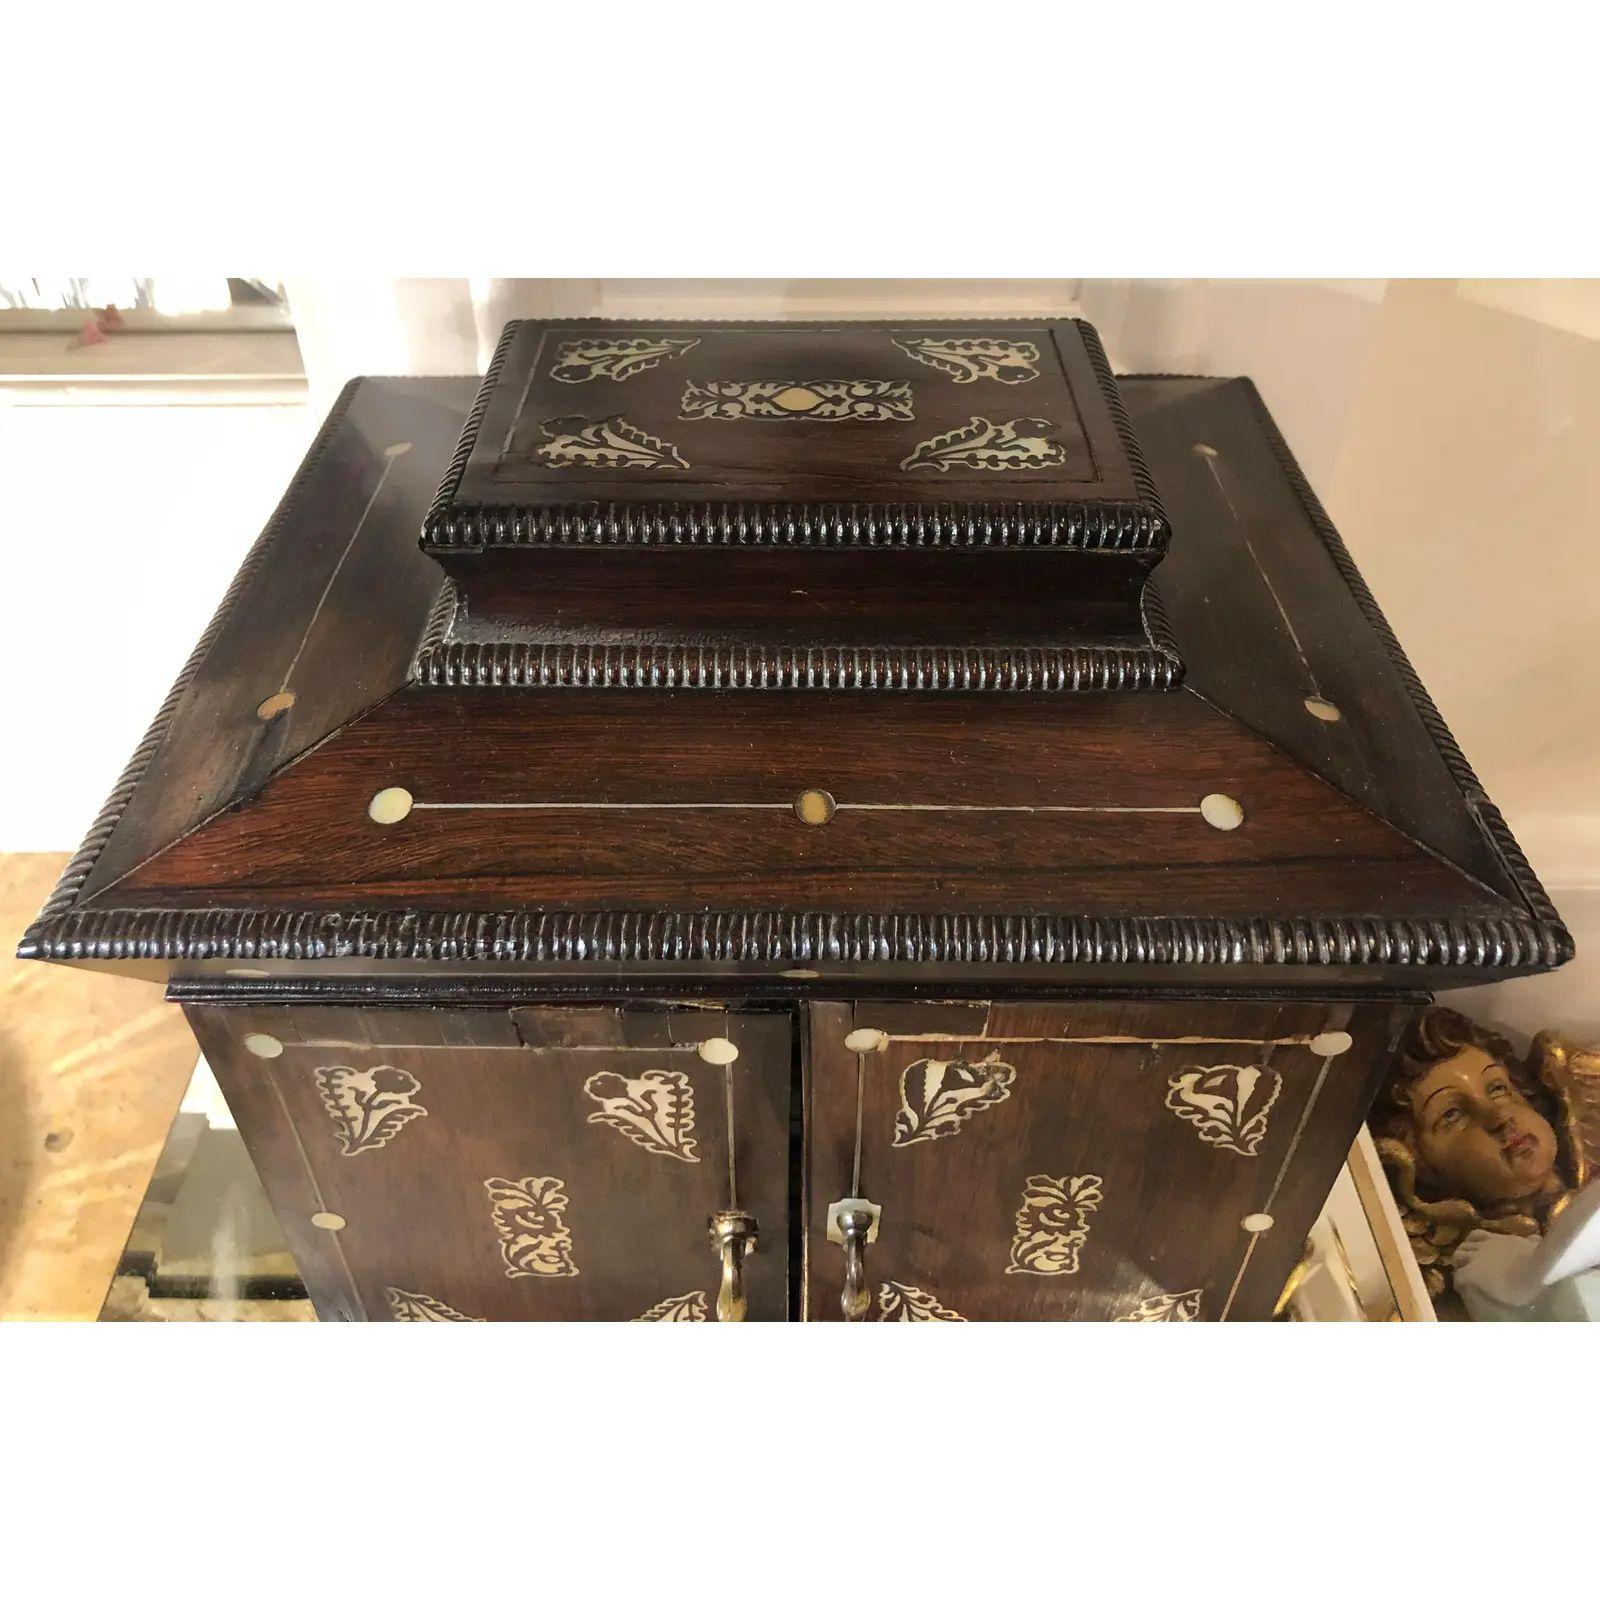 Antique Japanese Mother of Pearl inlaid jewelry box w lap desk

This item includes restricted materials and can not be sold outside of the contiguous United States.

Additional information: 
Materials: Mother-of-Pearl, Rosewood
Please note